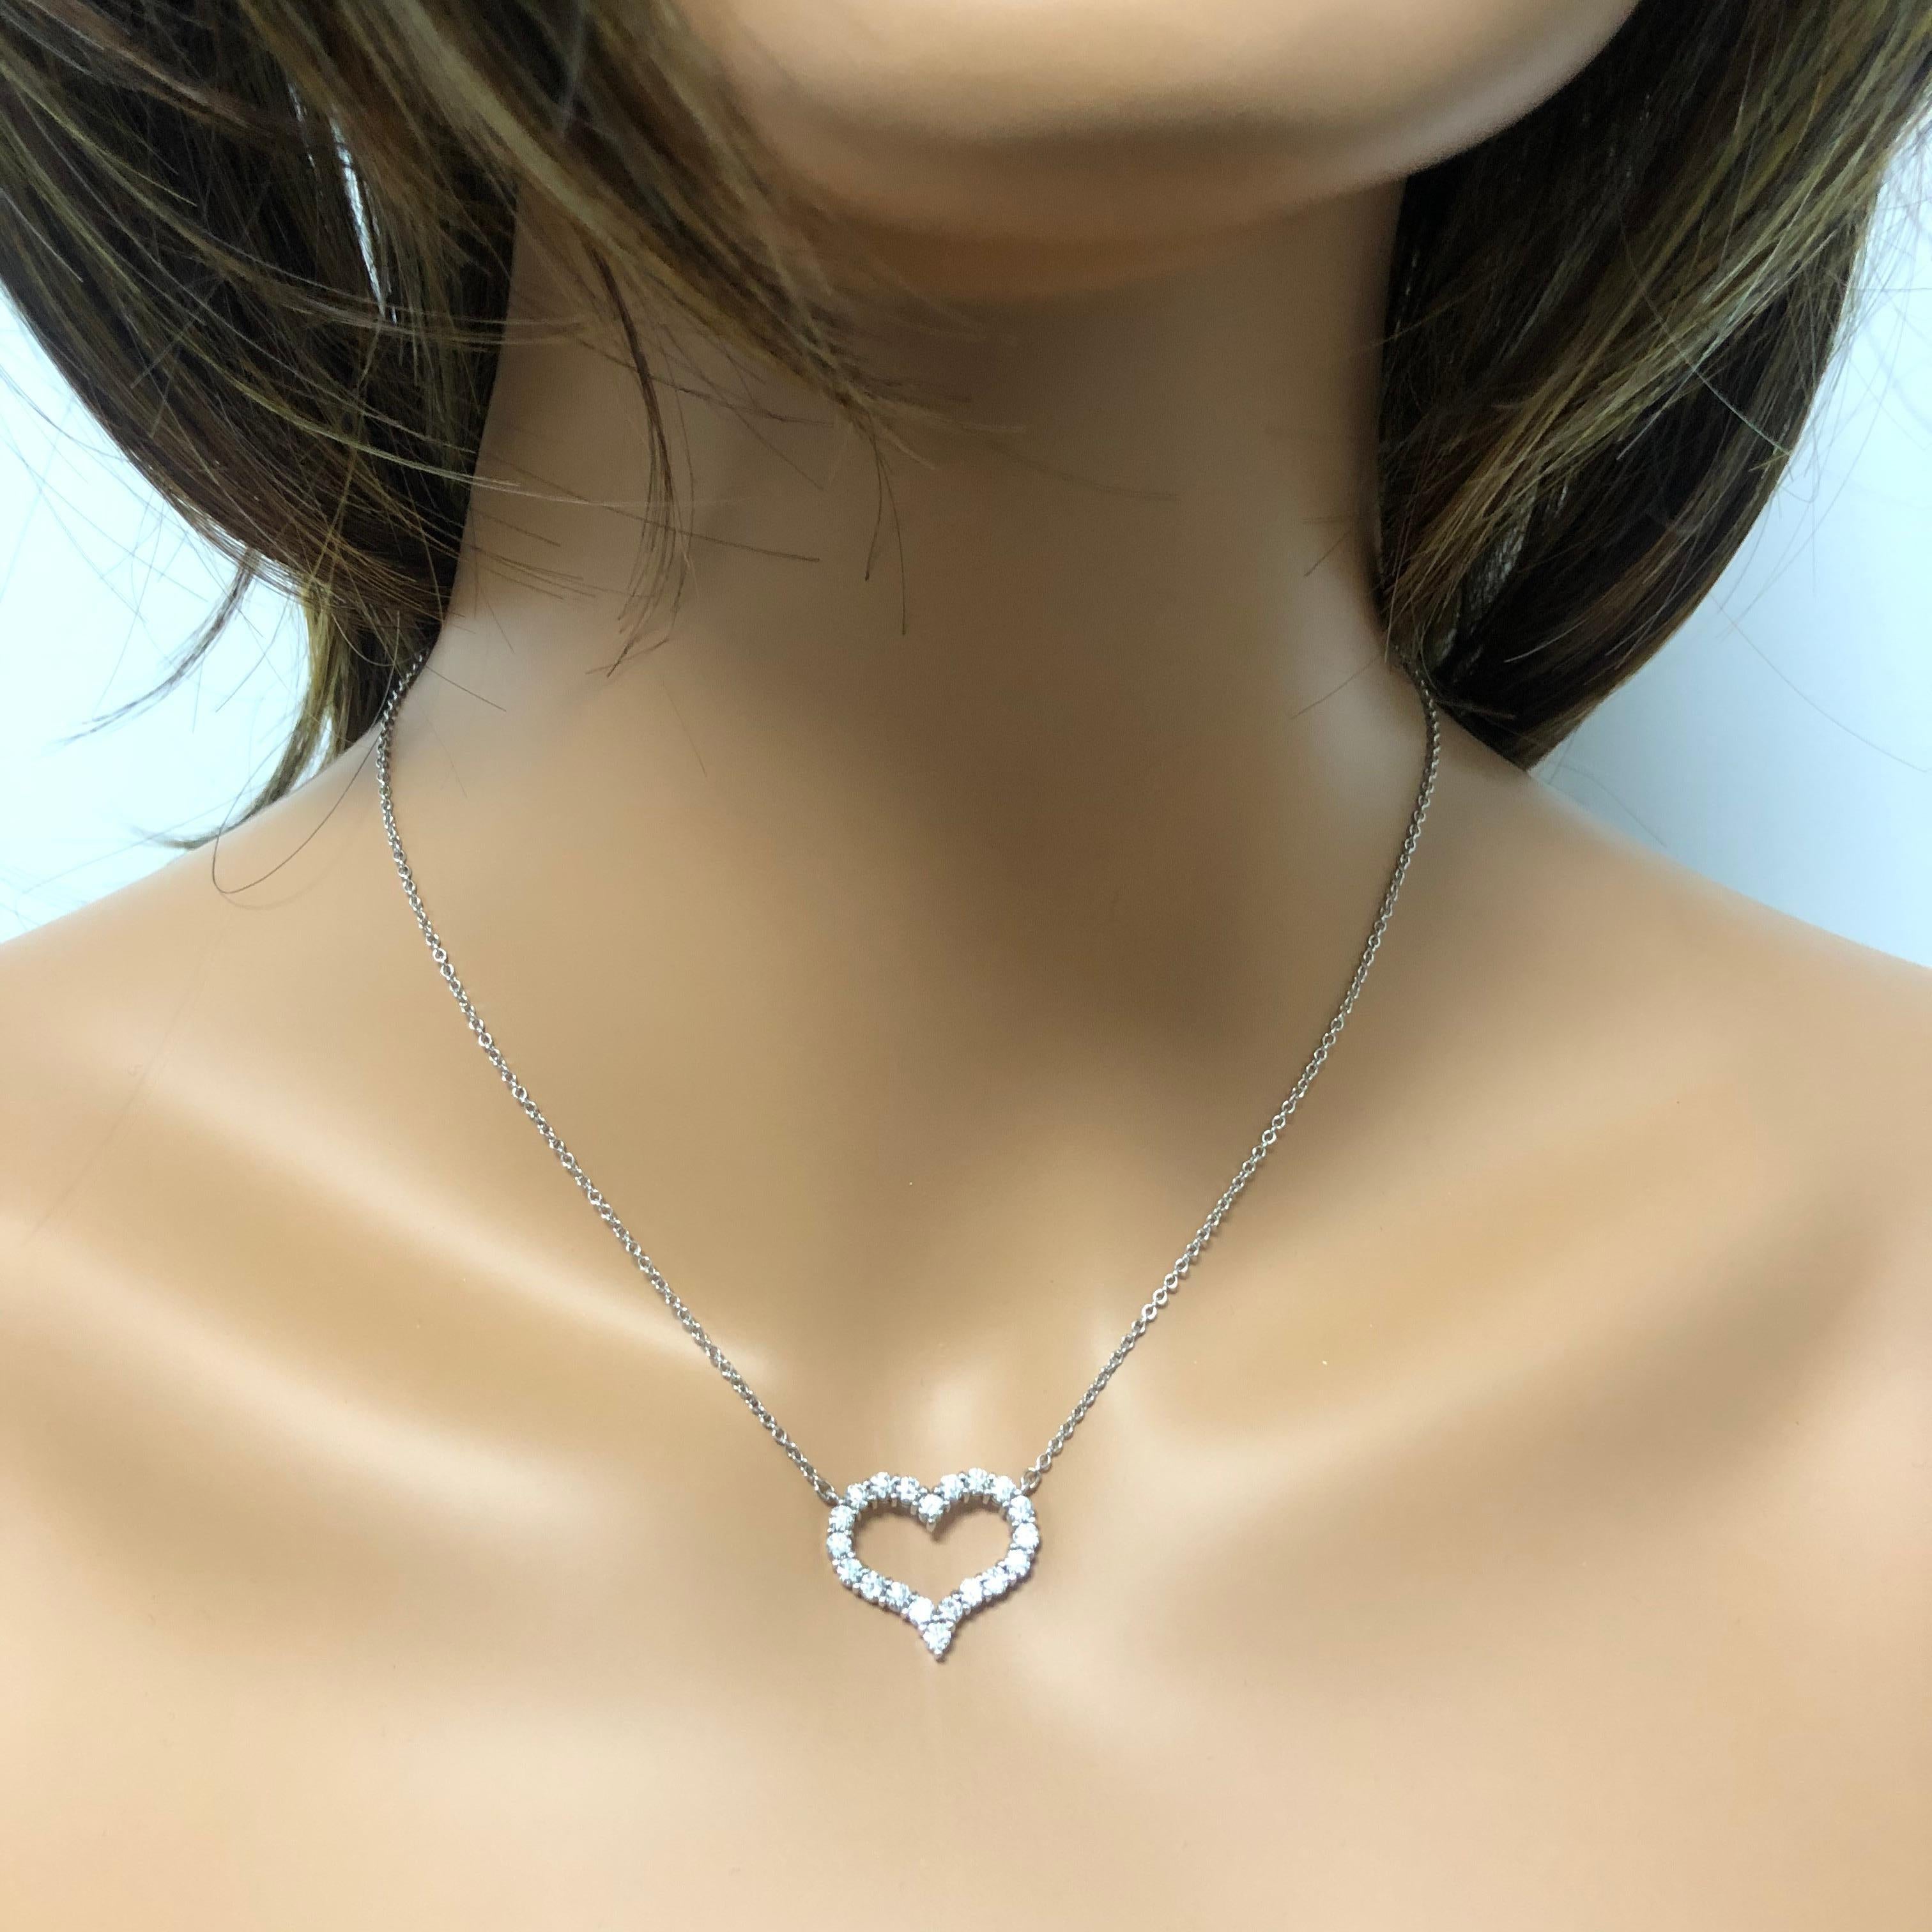 What better way to symbolize giving your heart to that special person than a diamond pendant necklace. This necklace showcases 20 sparkling round diamonds weighing 1.52 carats total set in a gorgeous open work design made with 14k white gold. Comes